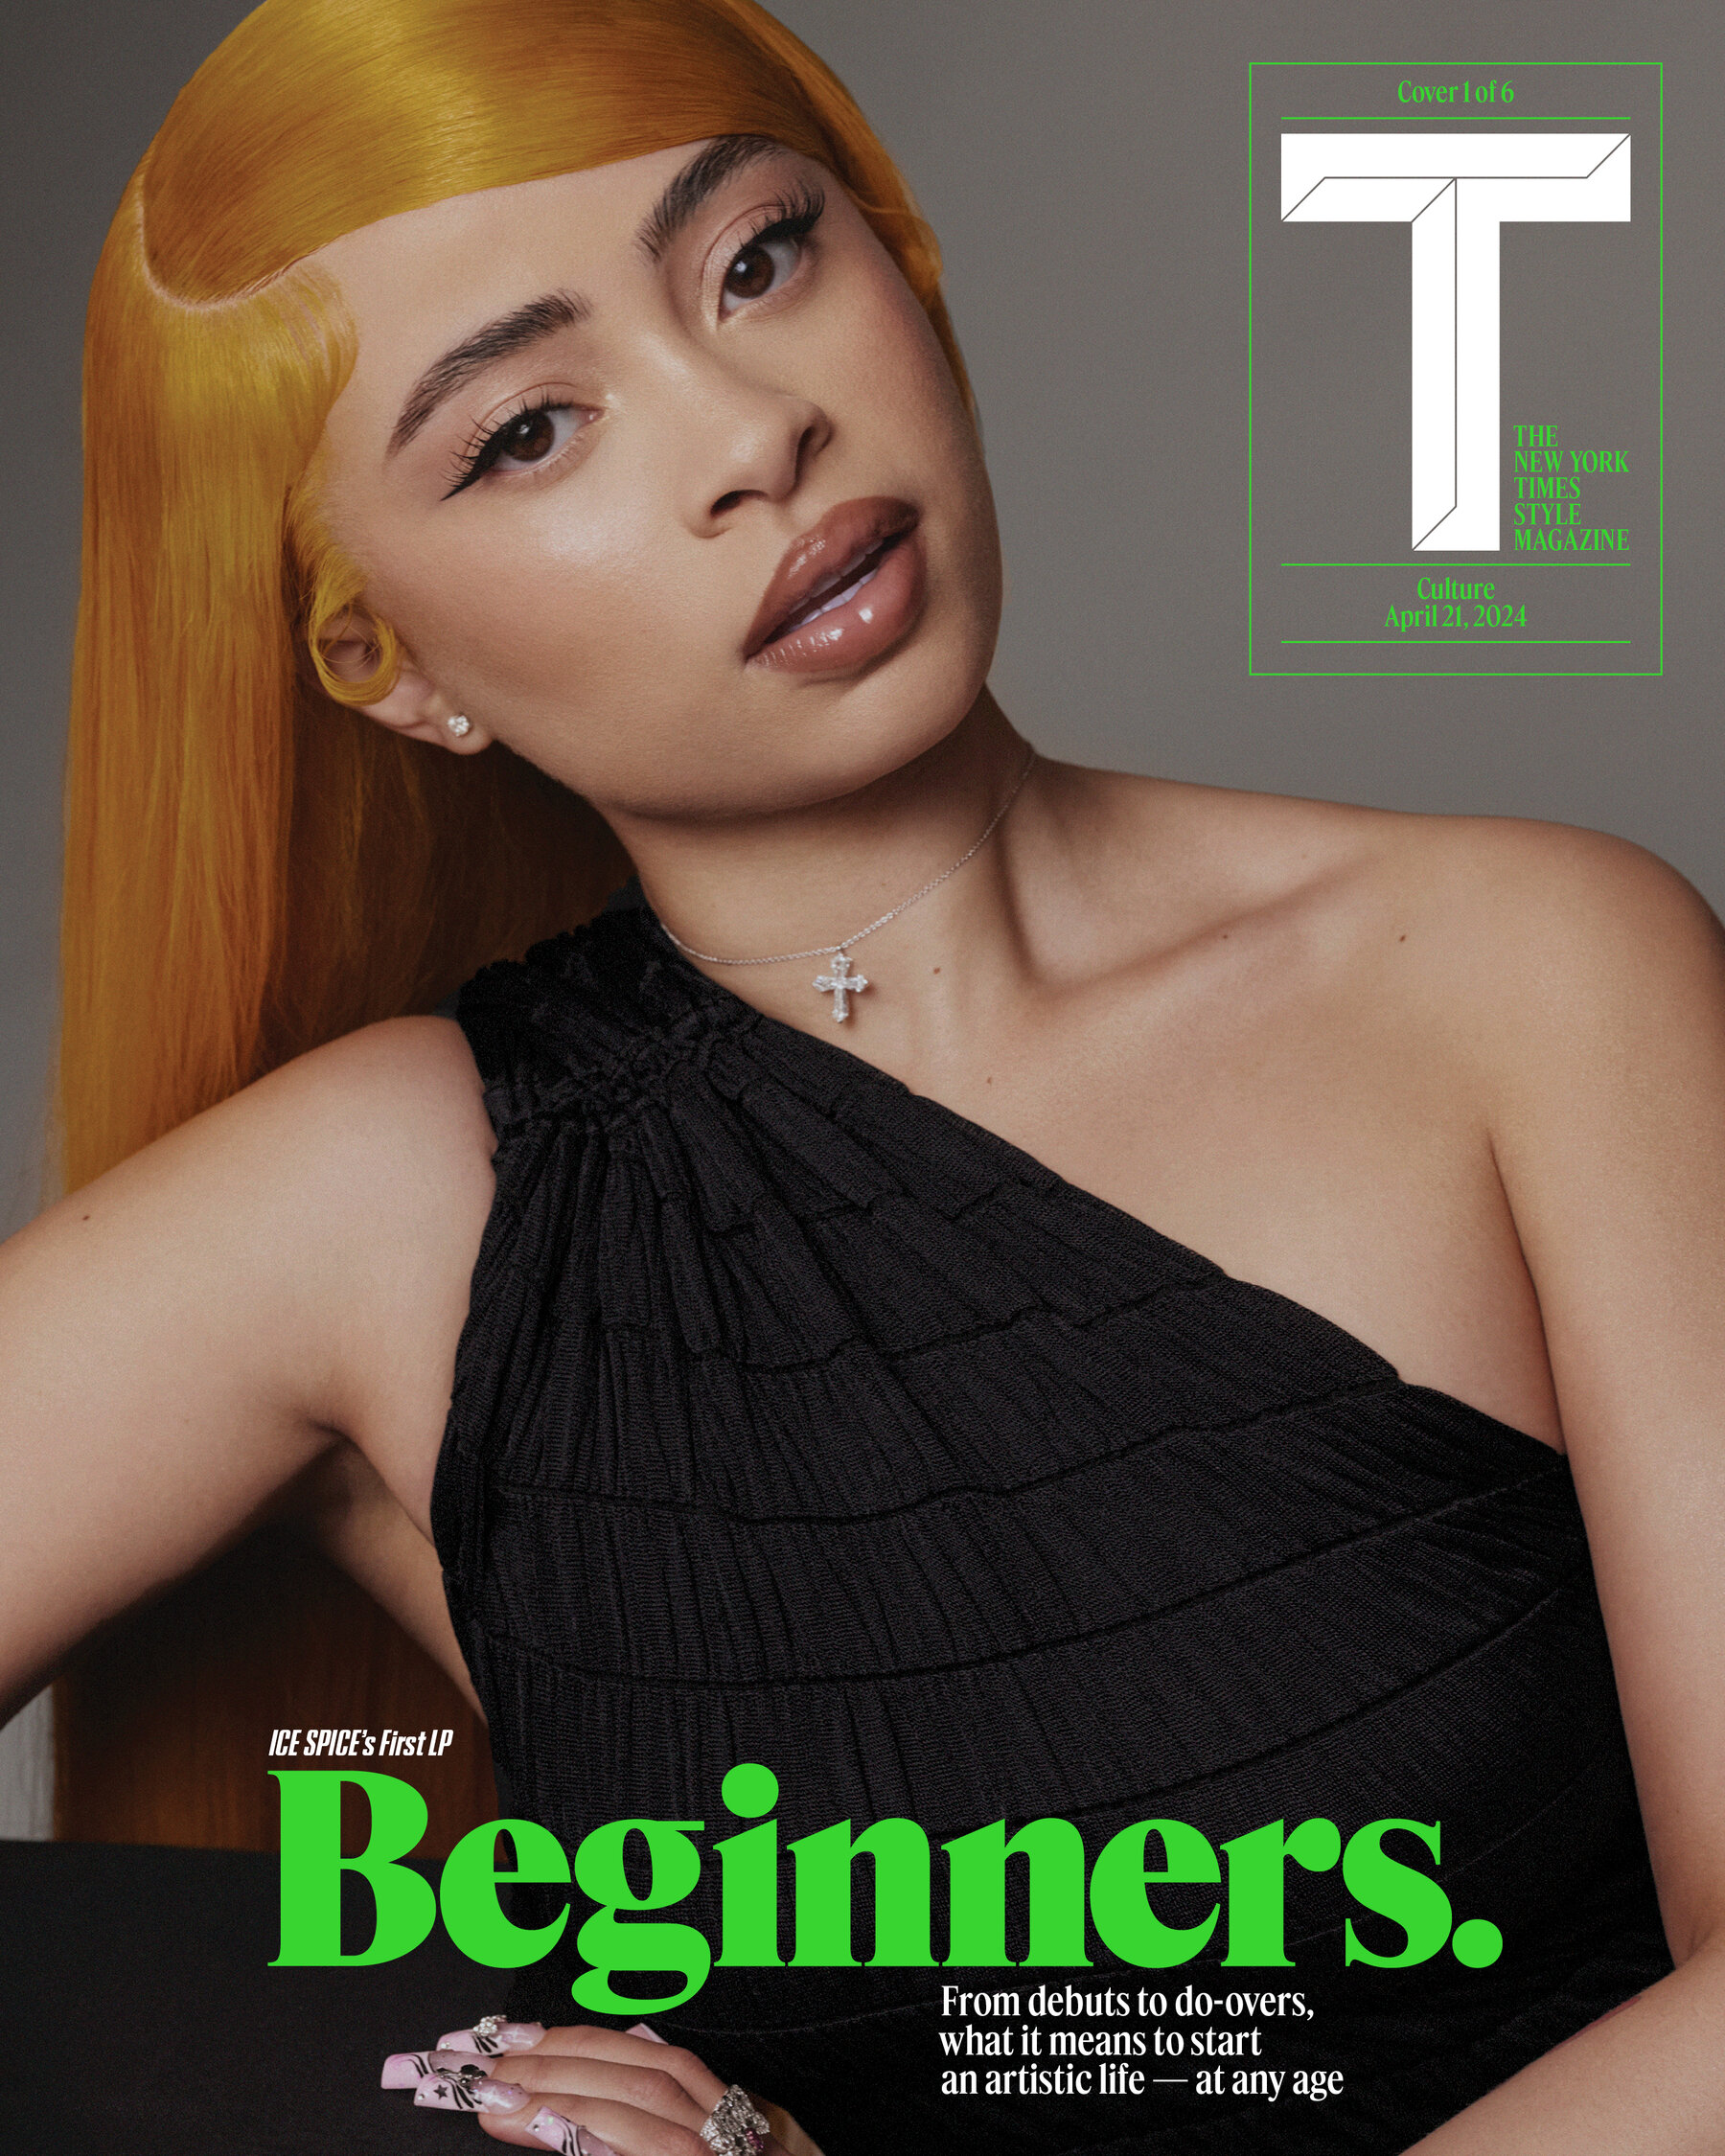 A cover of T: The New York Times Style Magazine's April 21, 2024 Culture issue, with the heading "Beginners. From debuts to do-overs, what it means to start an artistic life — at any age." On the cover is Ice Spice, with orange hair, wearing a black ruched top with one shoulder strap and a crucifix necklace.